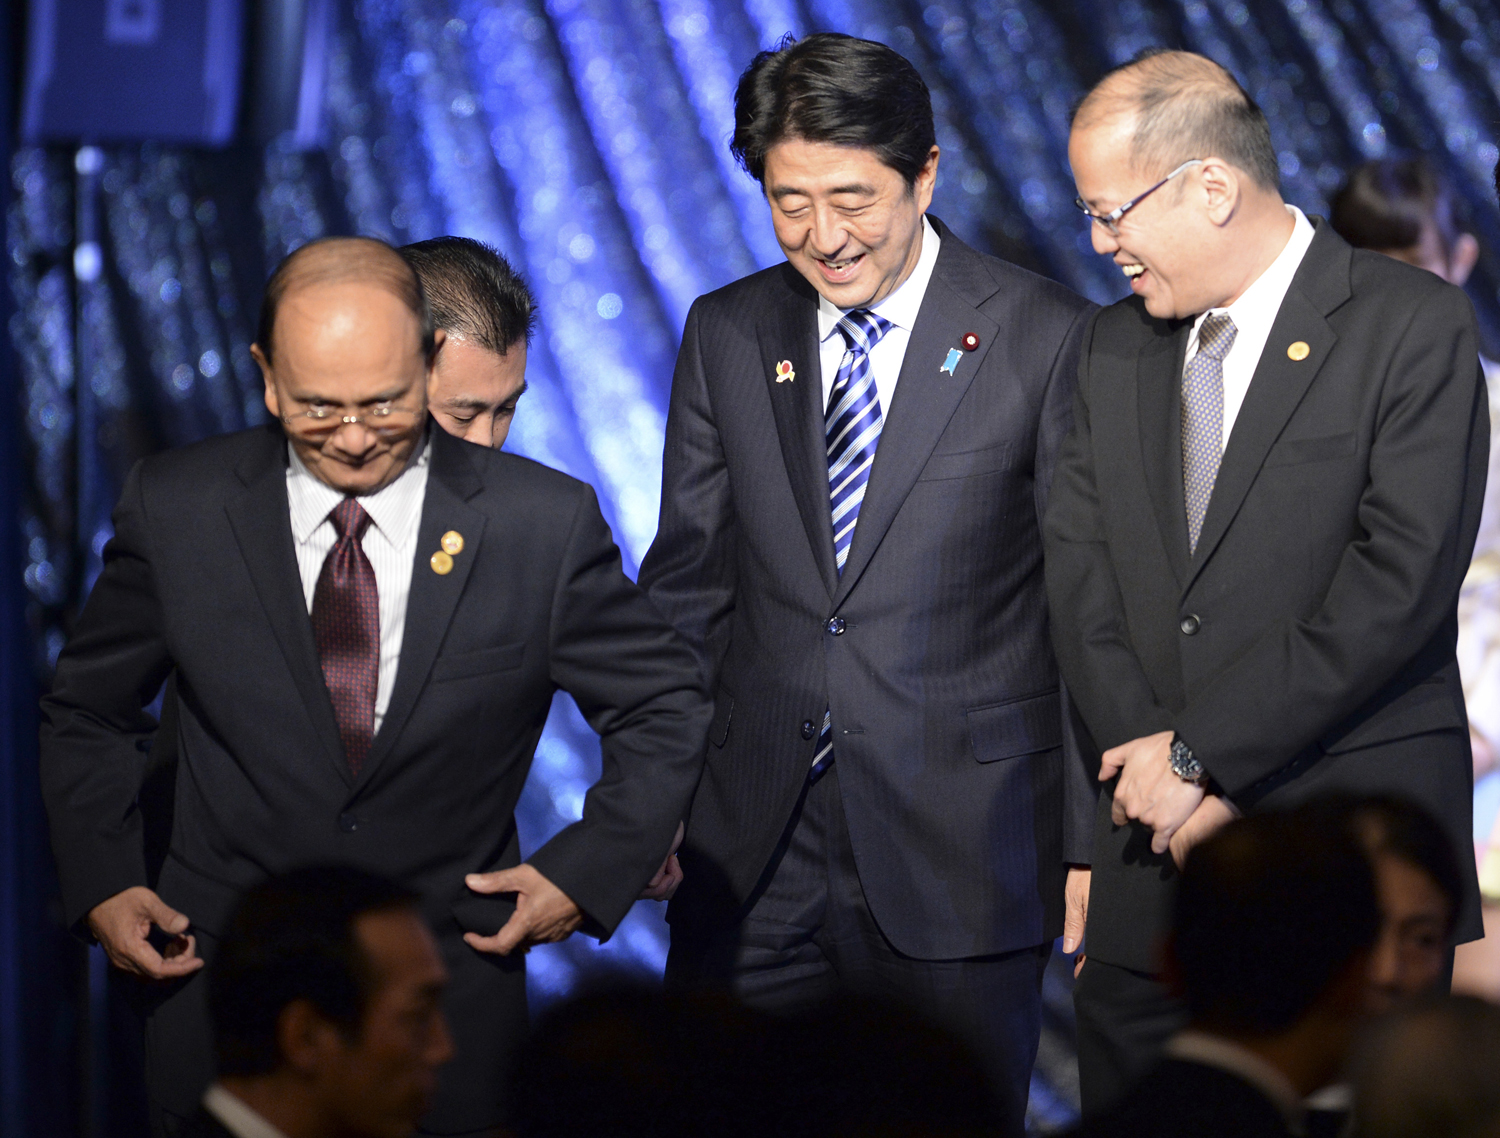 From left, Burma's President Thein Sein, Japan's Prime Minister Shinzo Abe and Philippine President Benigno Aquino III leave the stage during a gala dinner at the ASEAN-Japan Commemorative Summit meeting in Tokyo on Dec. 14, 2013 (POOL New / Reuters)